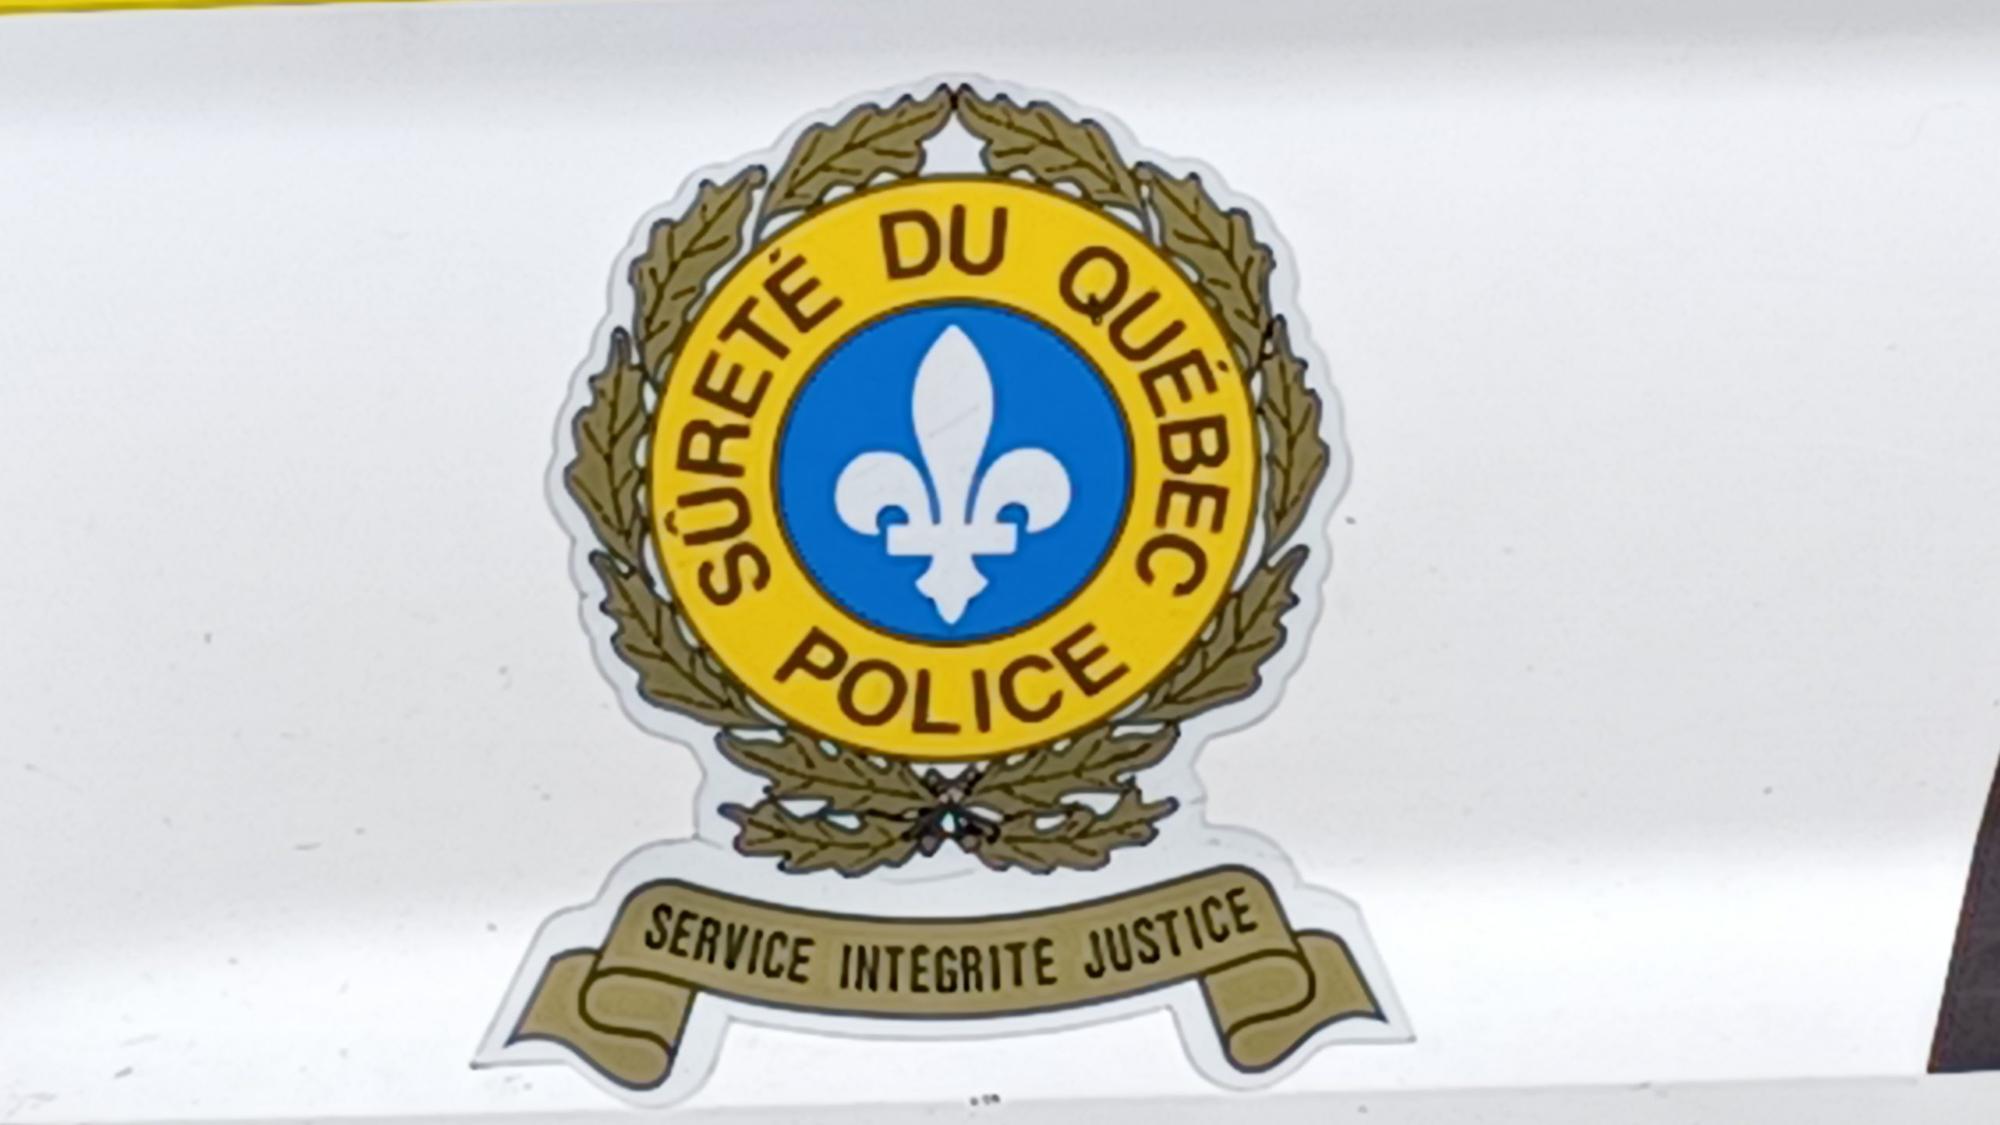 Two arrested in Saint-André-d’Argenteuil contraband search